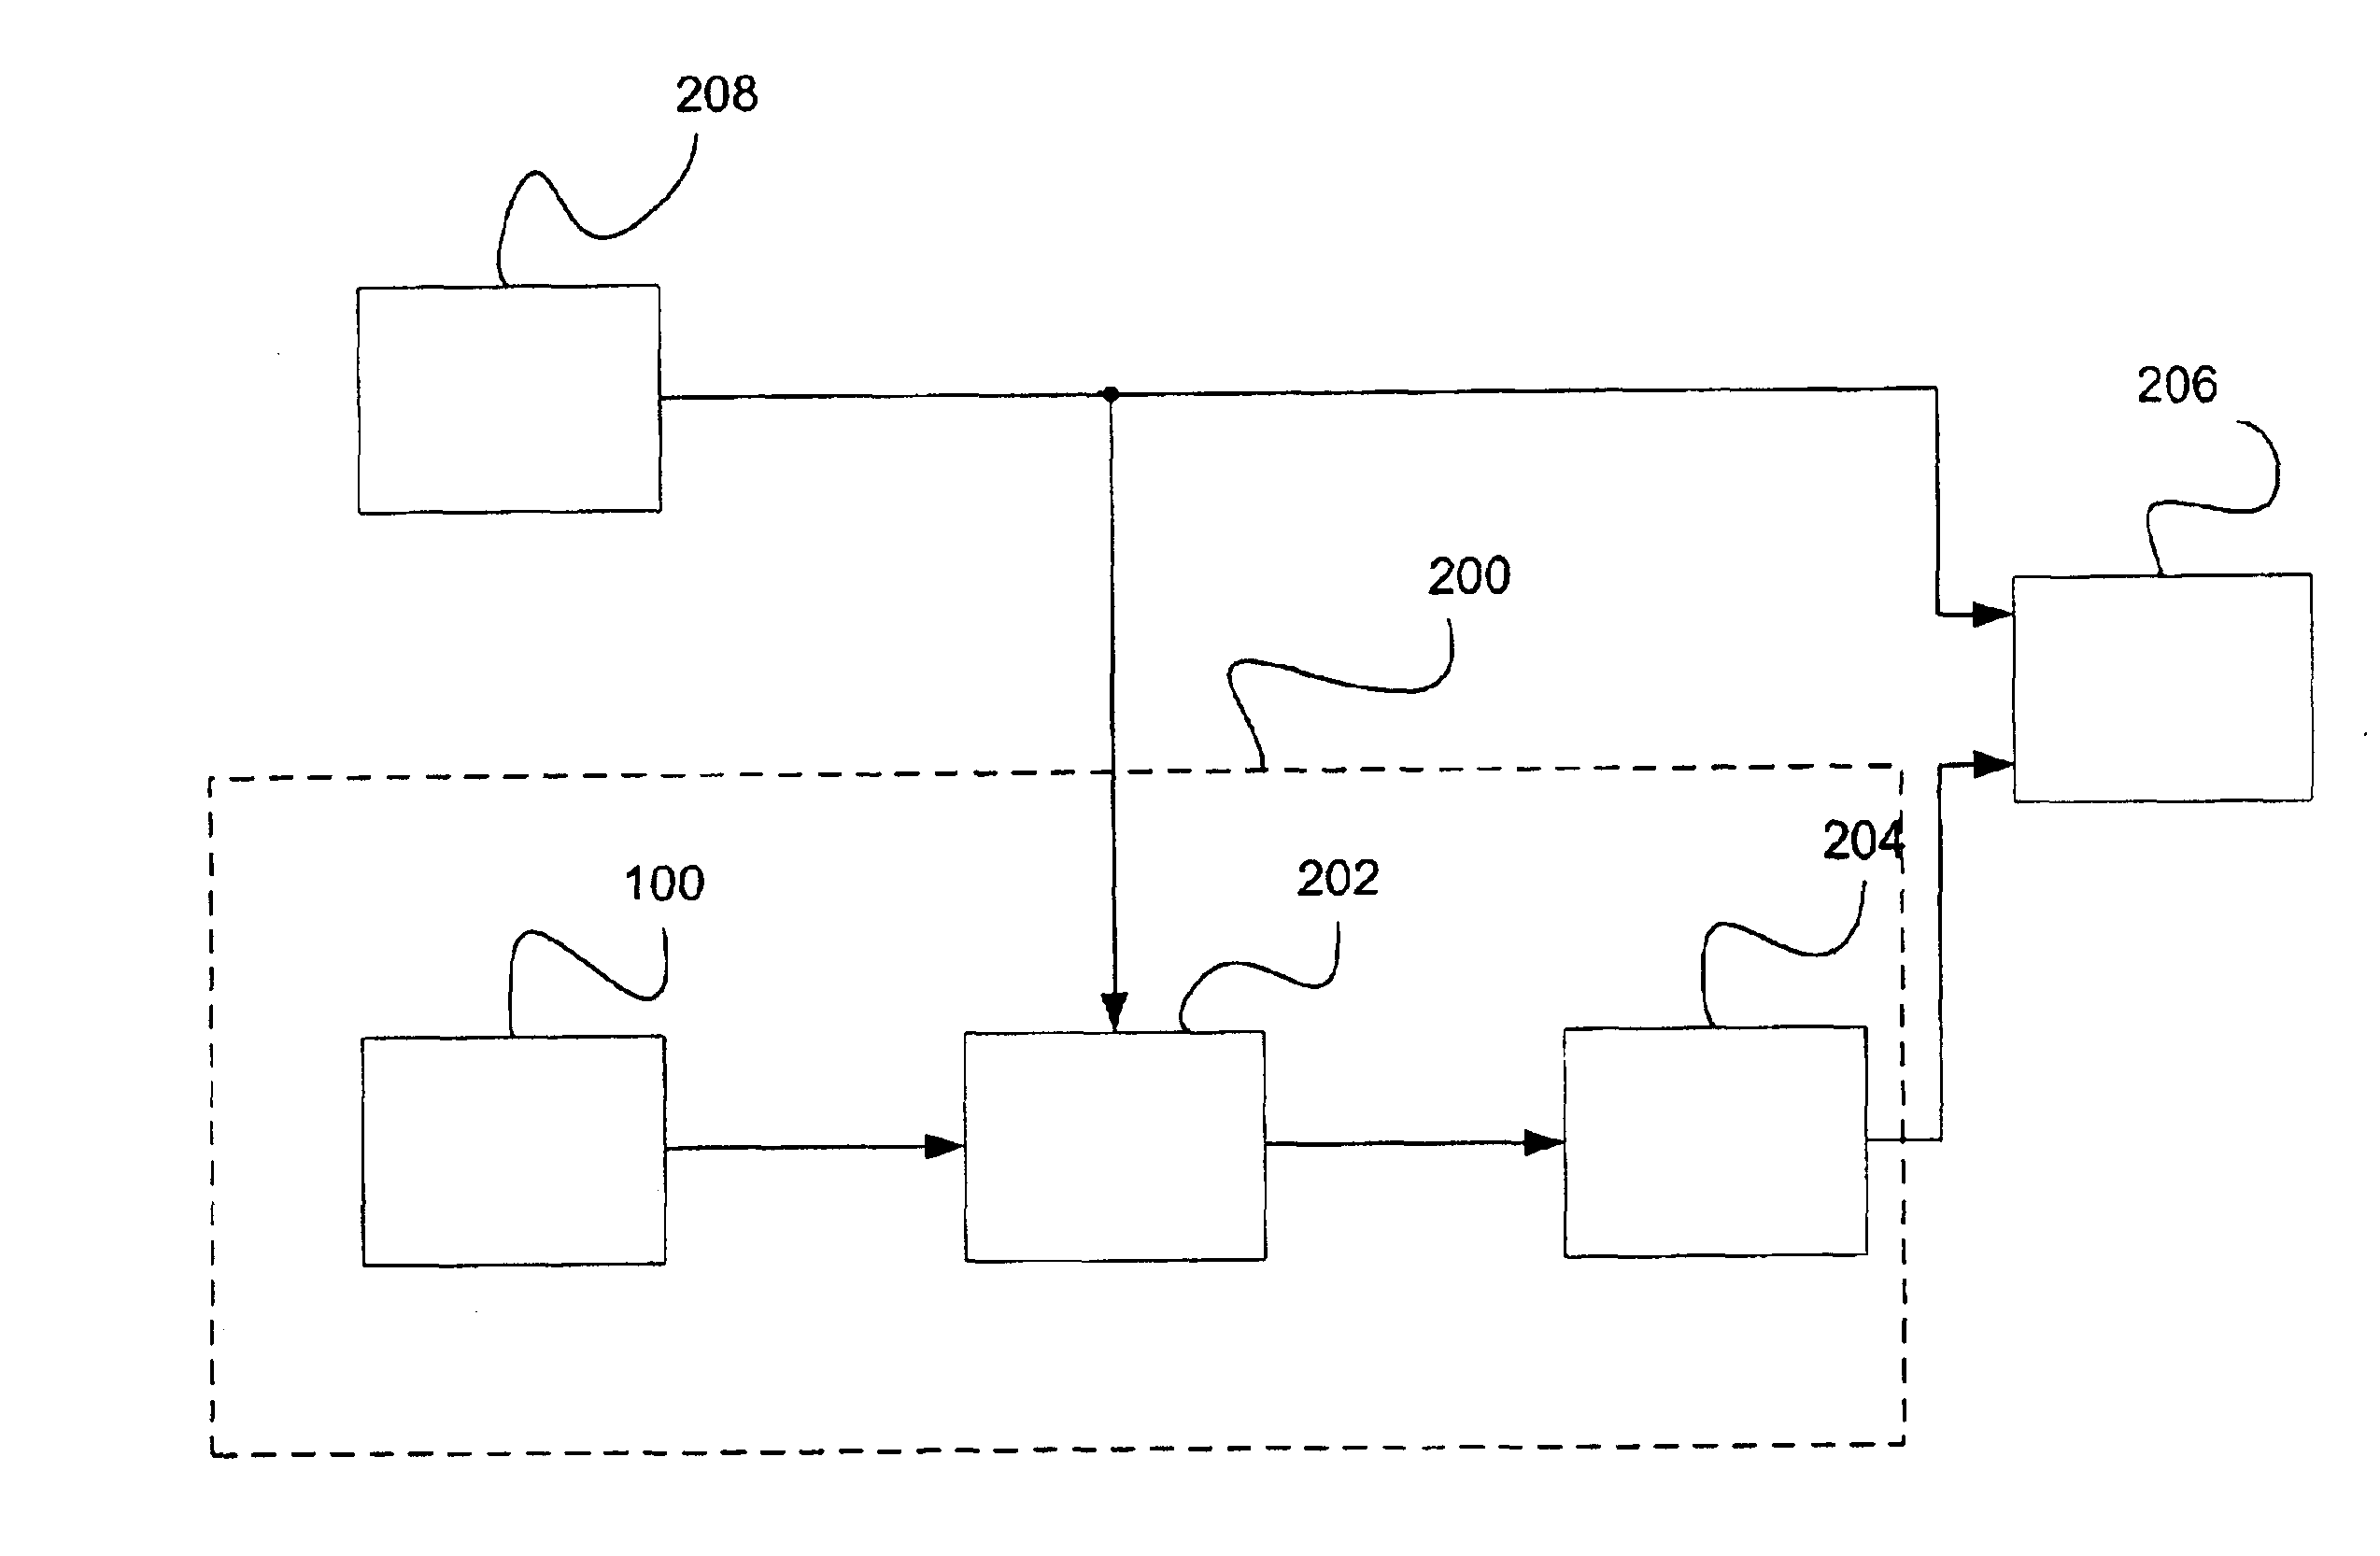 Methods of using fuel cell system configured to provide power to one or more loads